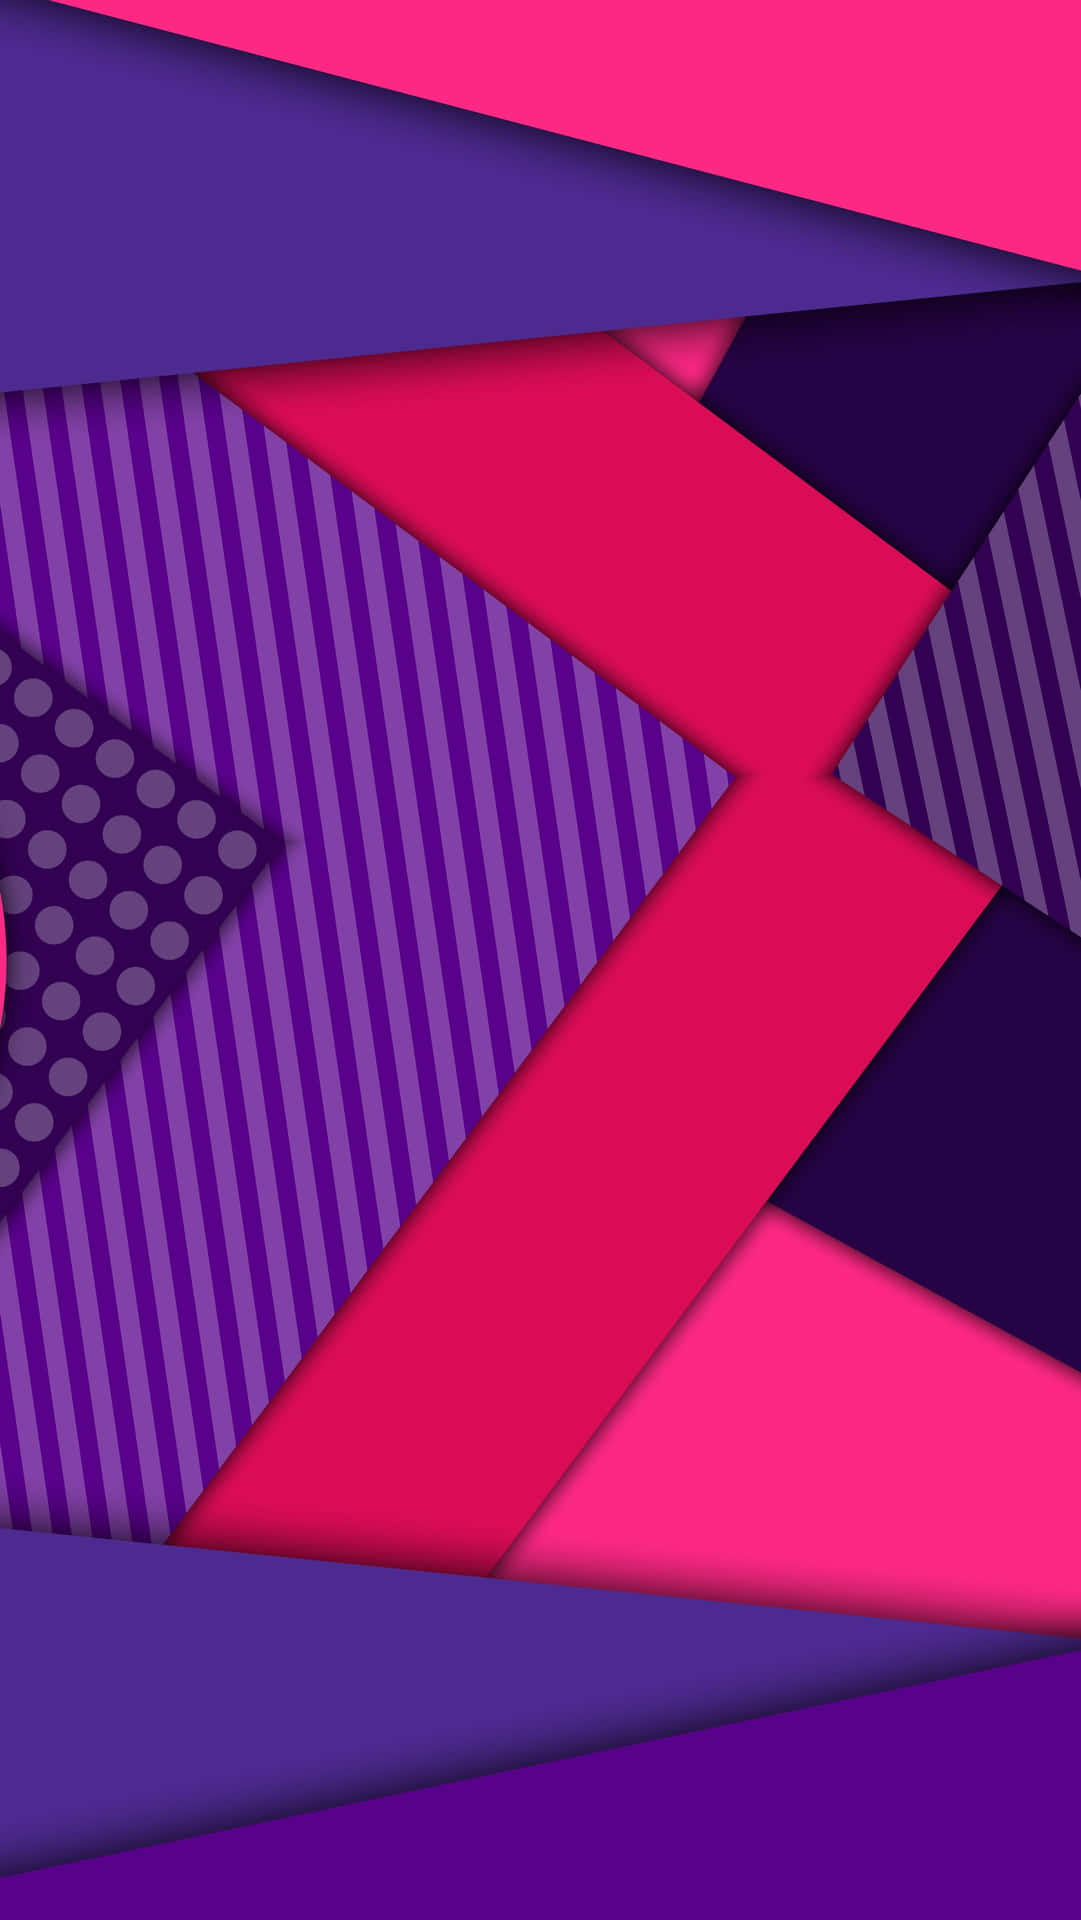 Download a purple and pink background with a triangle | Wallpapers.com